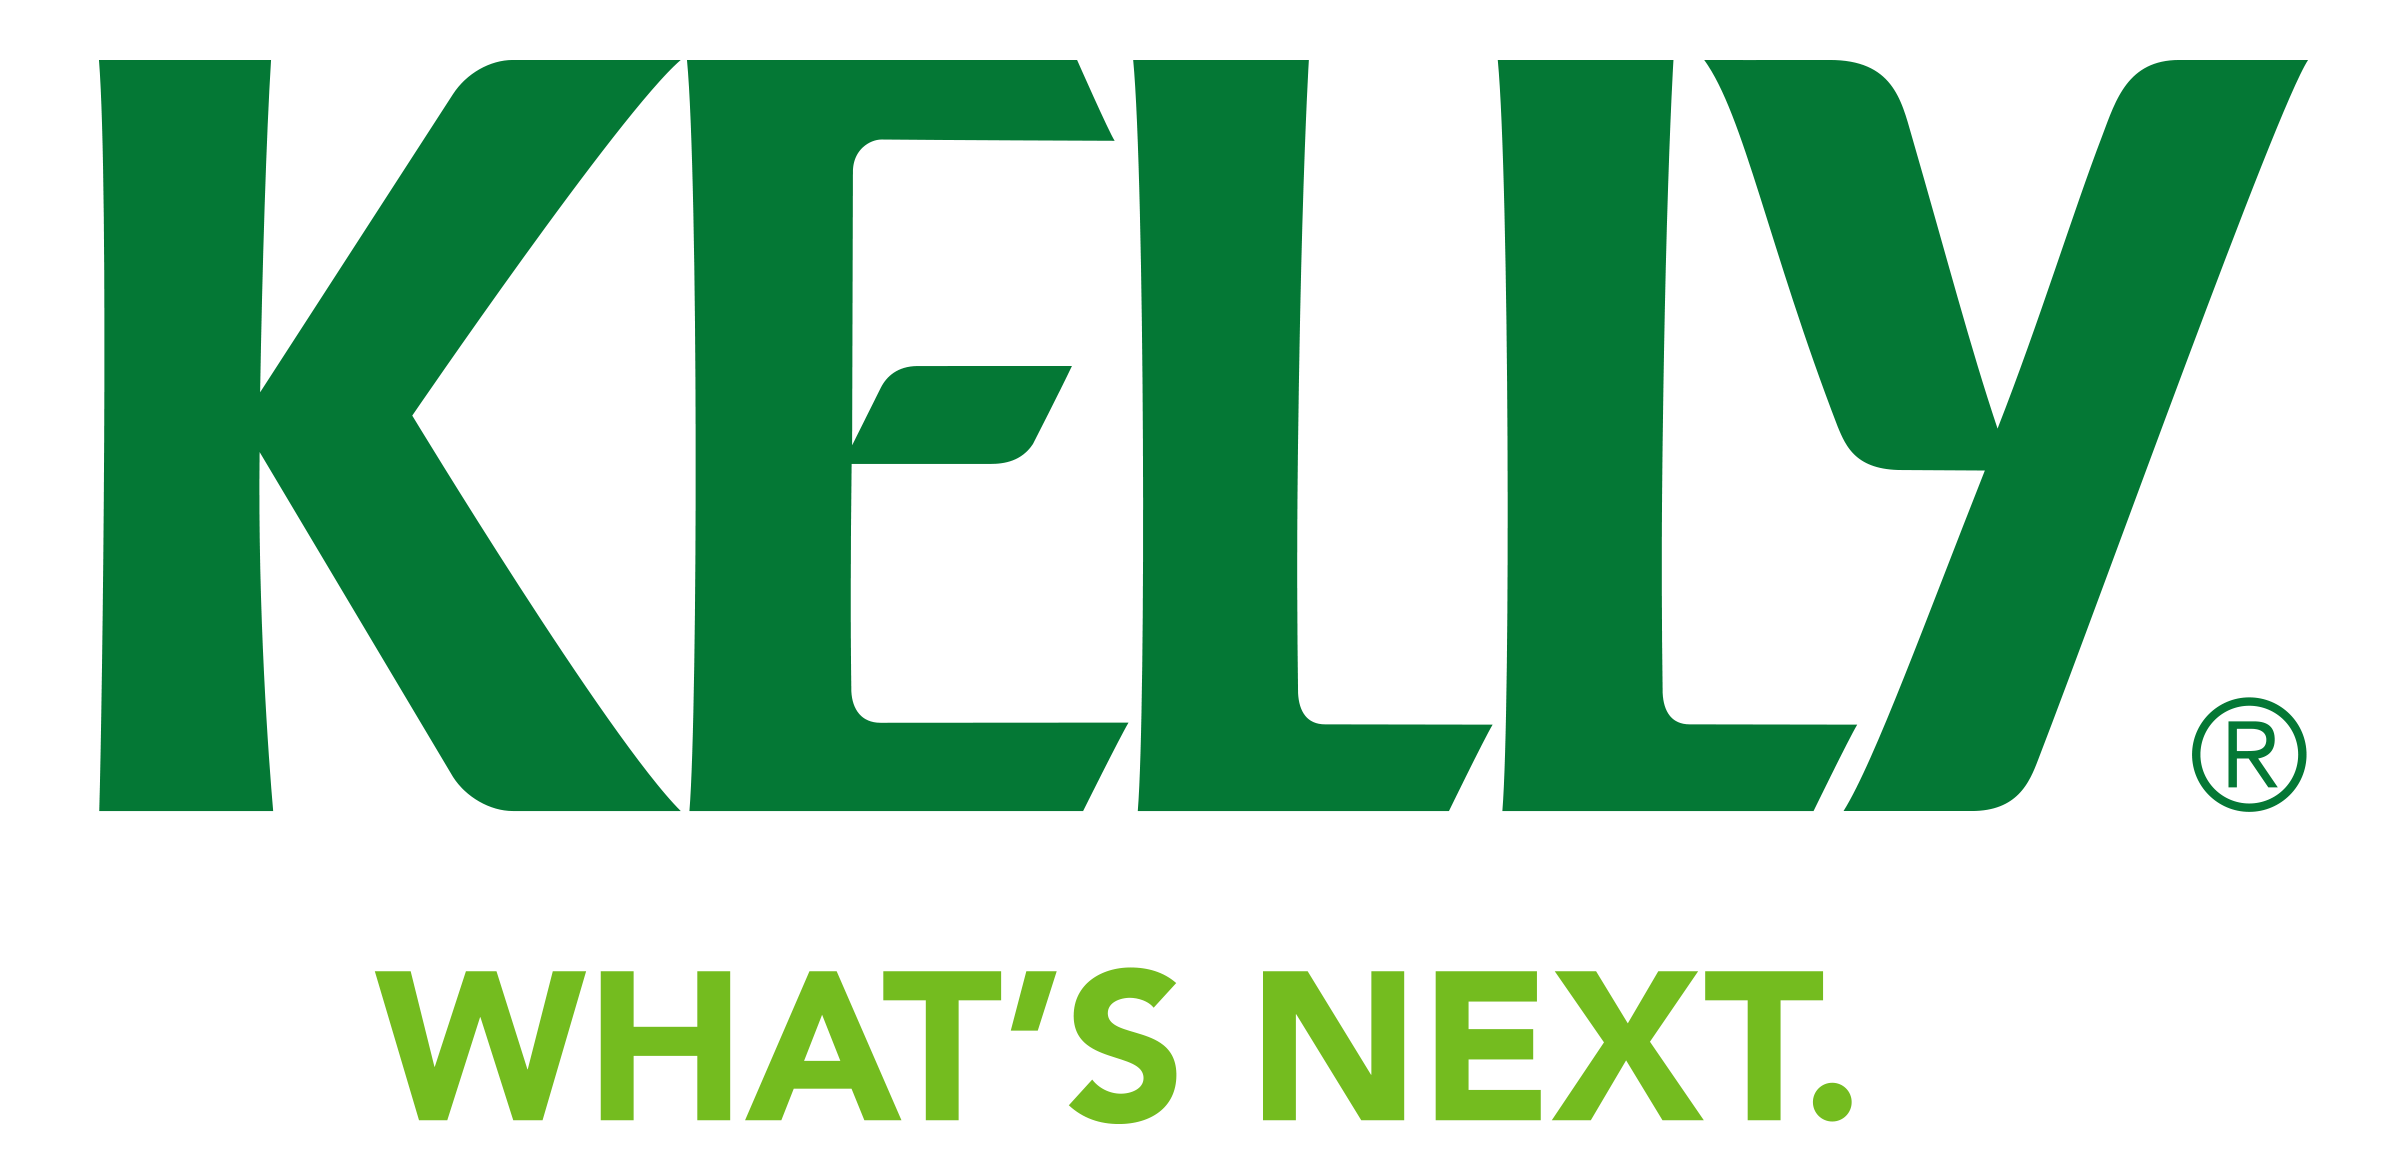 Kelly_WhatsNext_FullColor.png